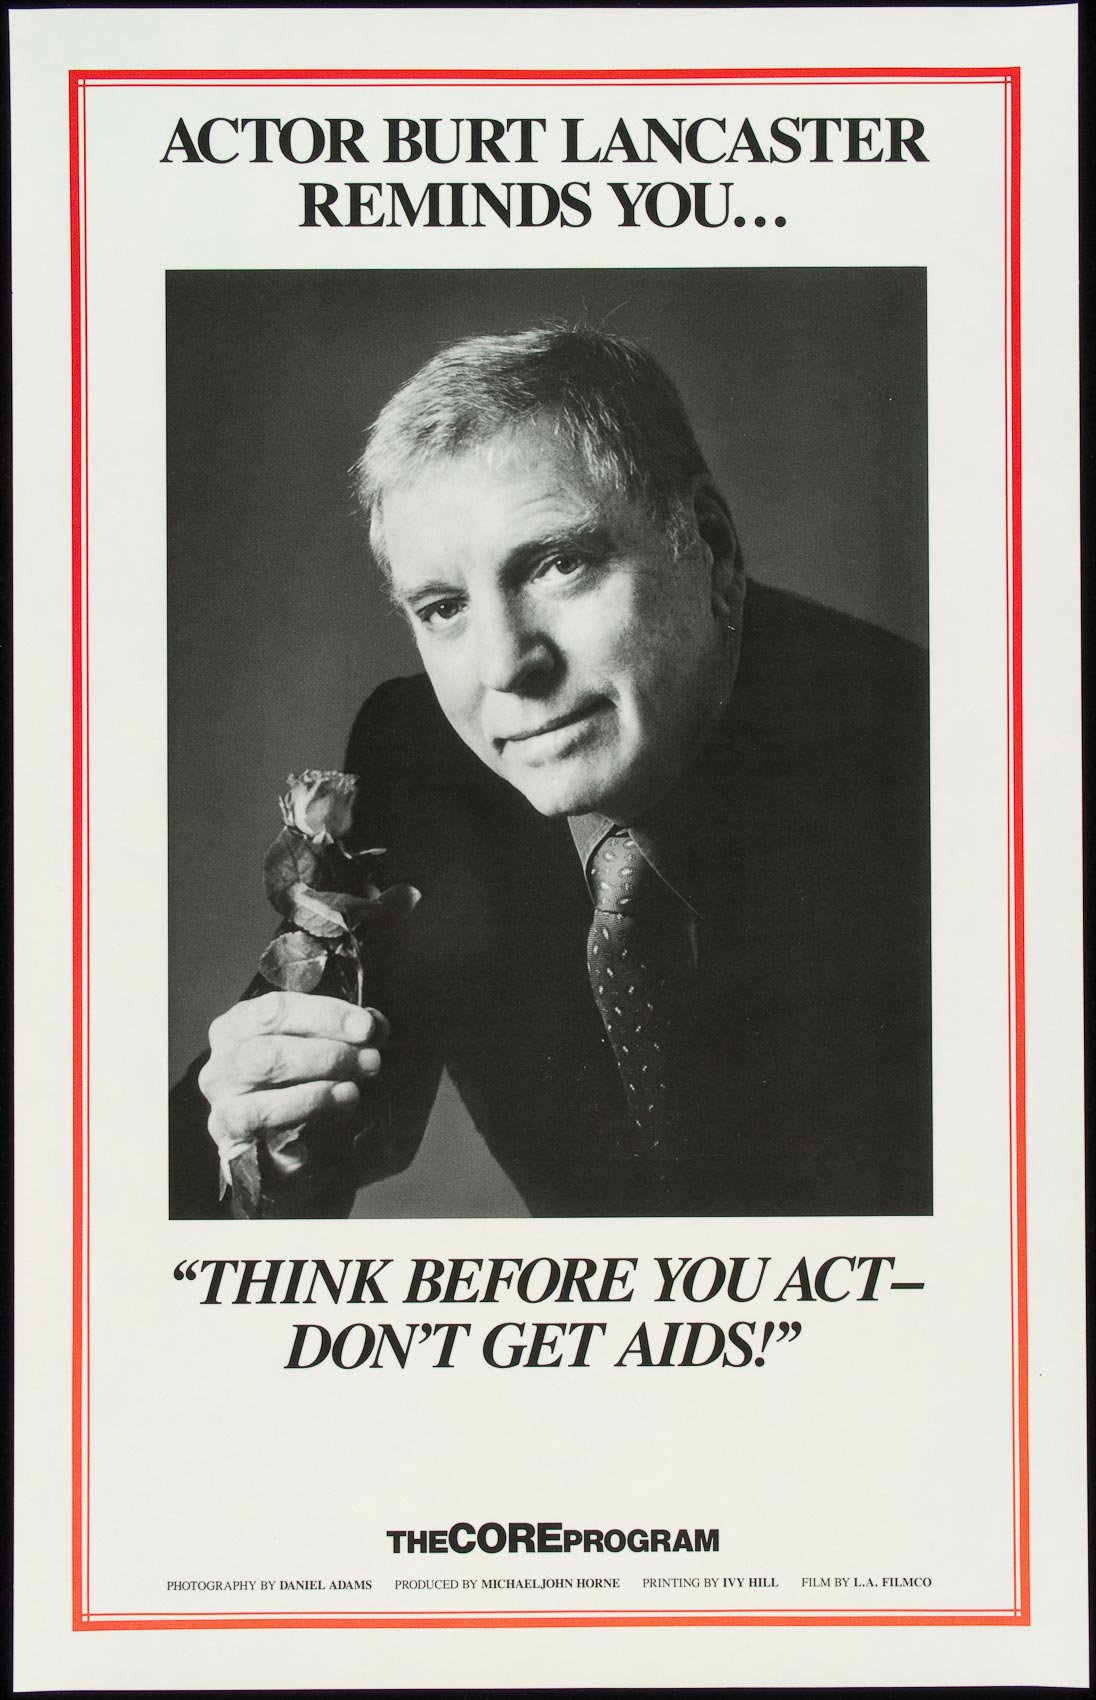 A 1985 poster featuring actor Burt Lancaster, made by the CORE Program in California.